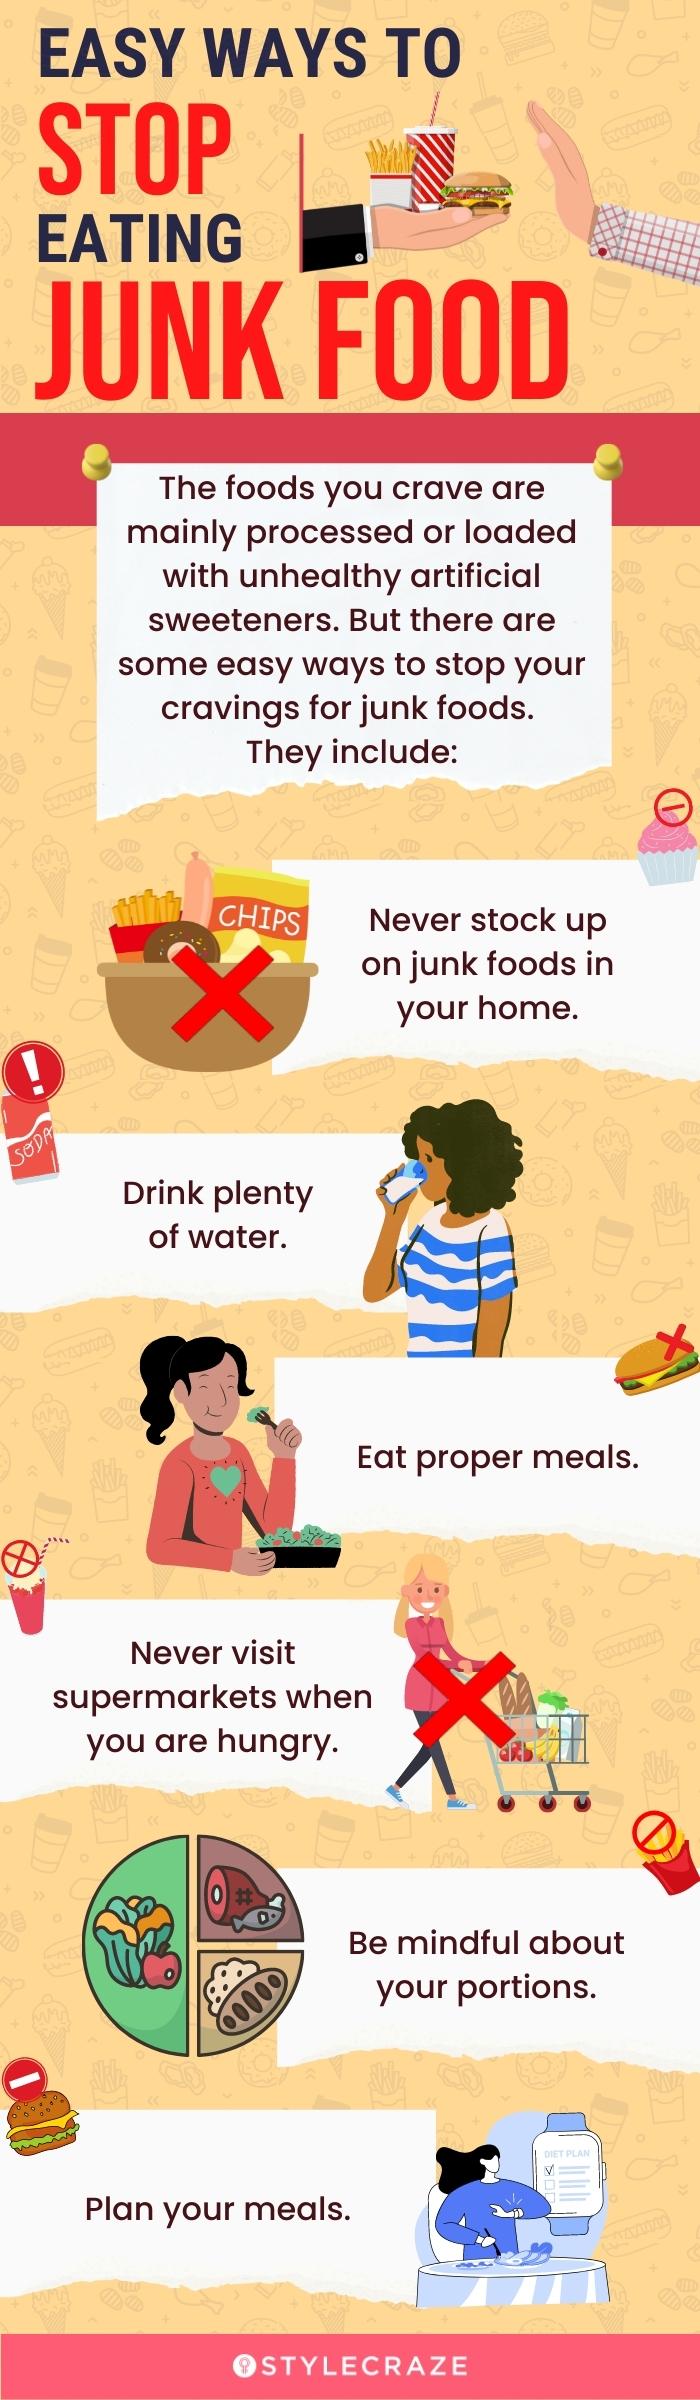 What Is Junk Food? Why Is It Bad For You? - NDTV Food